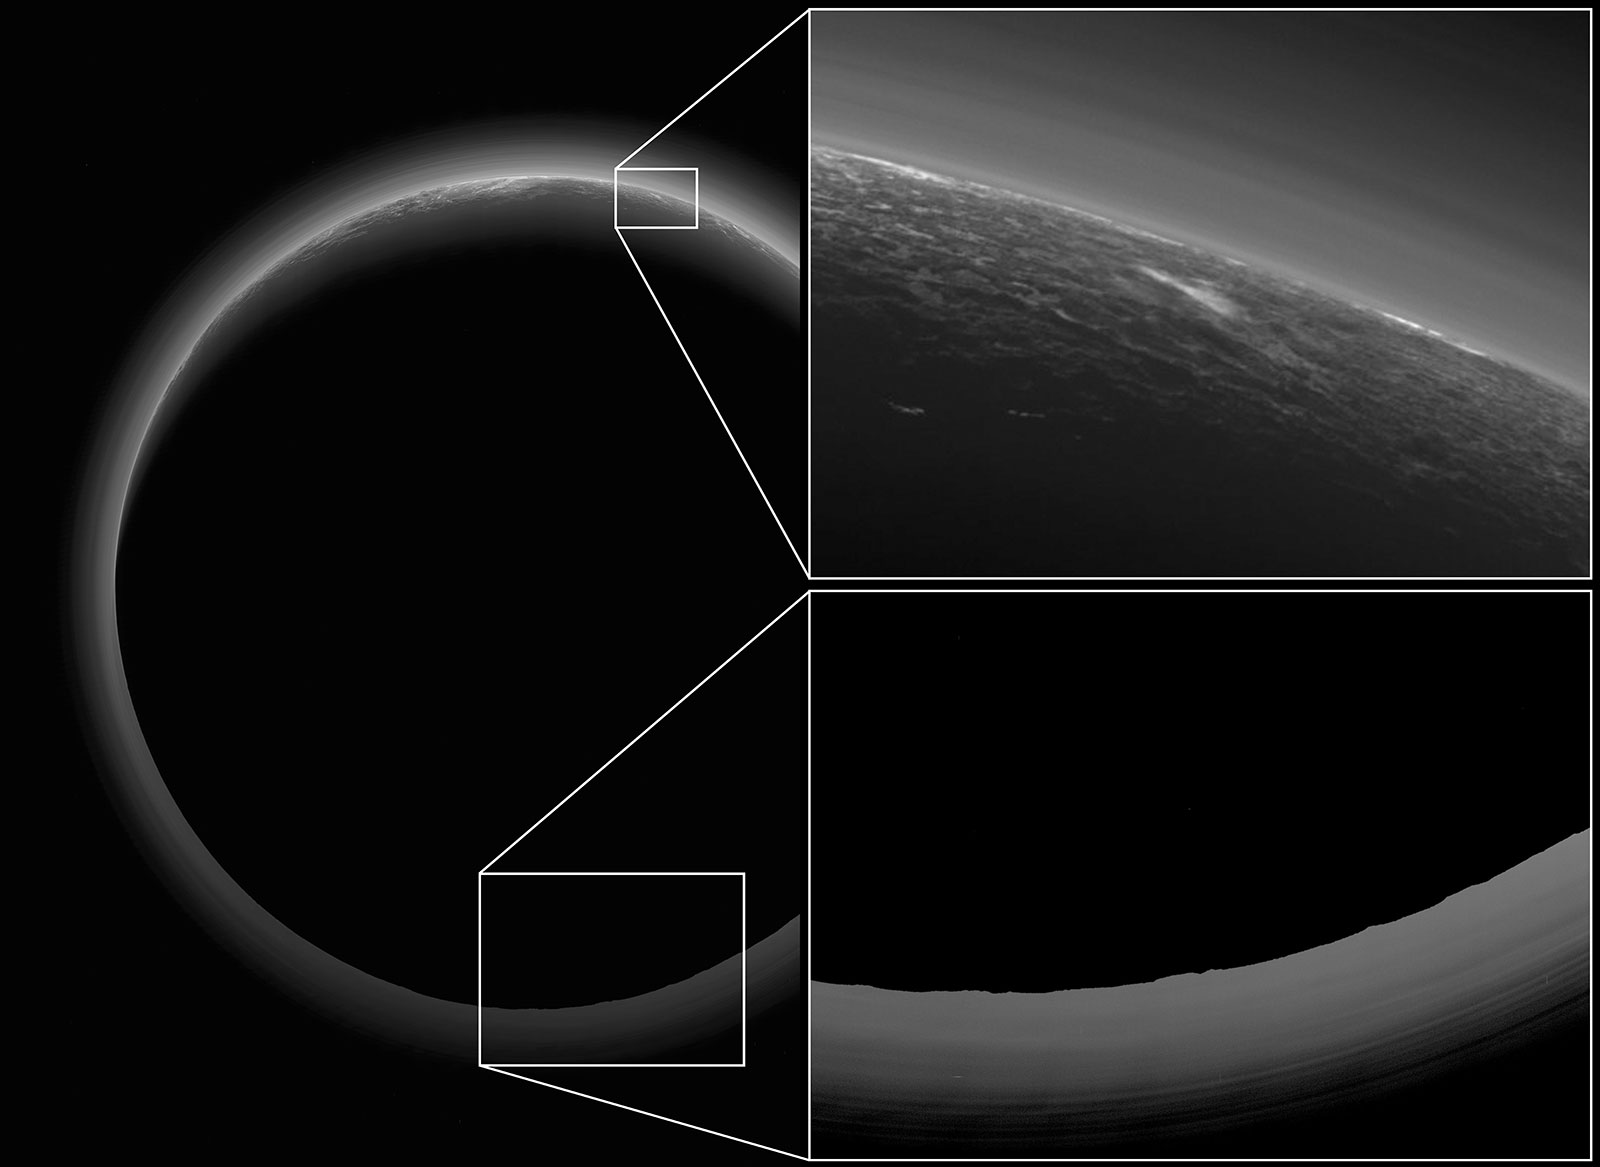 Backlit Pluto photo shows evidence of possible clouds